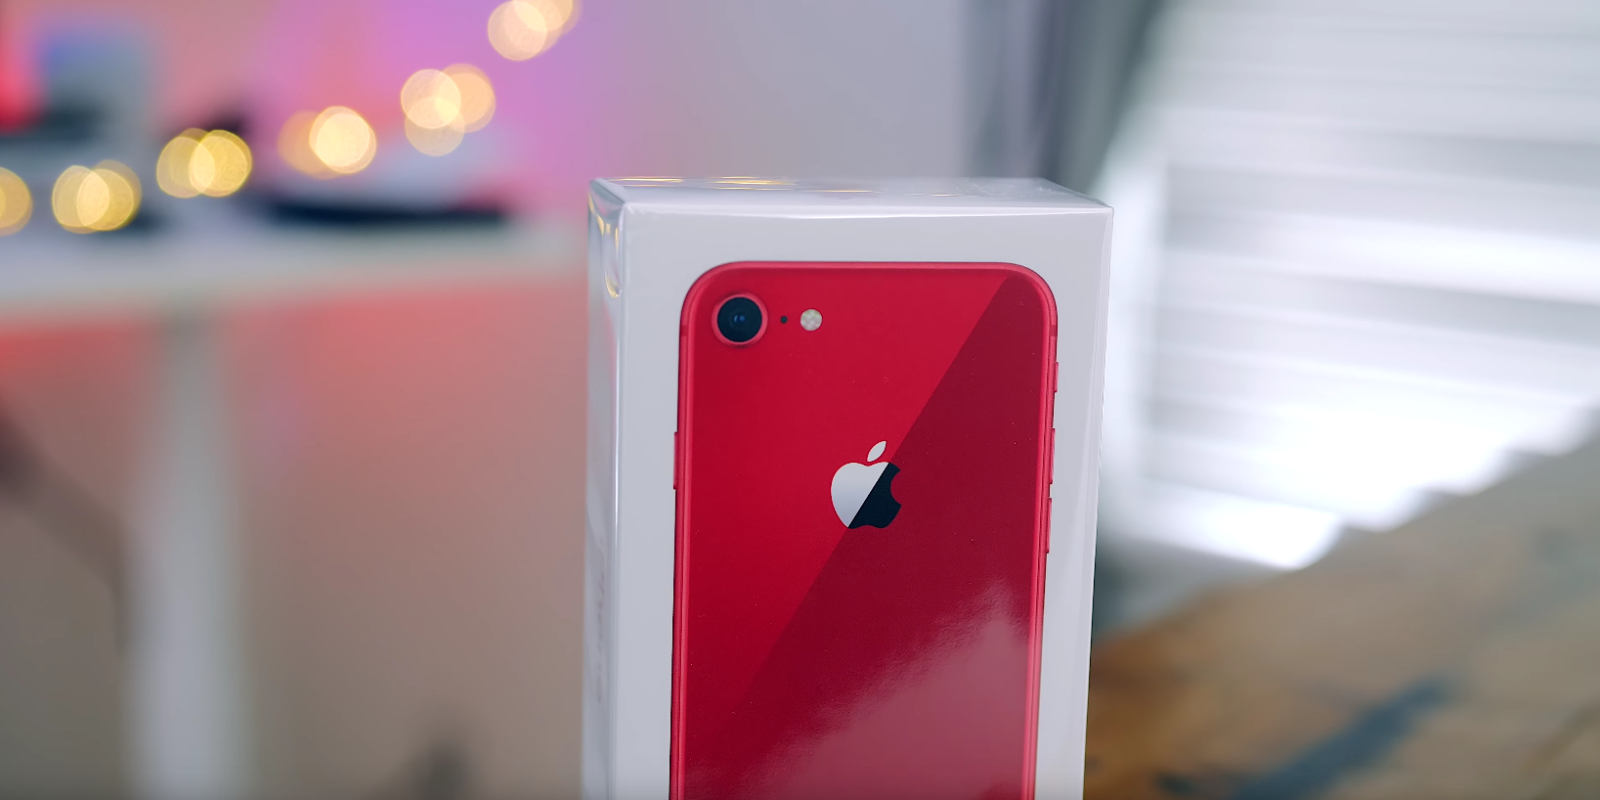 Win Apple’s new (RED) iPhone 8 & August’s Smart Lock + Connect Wi-Fi Bridge [Giveaway]